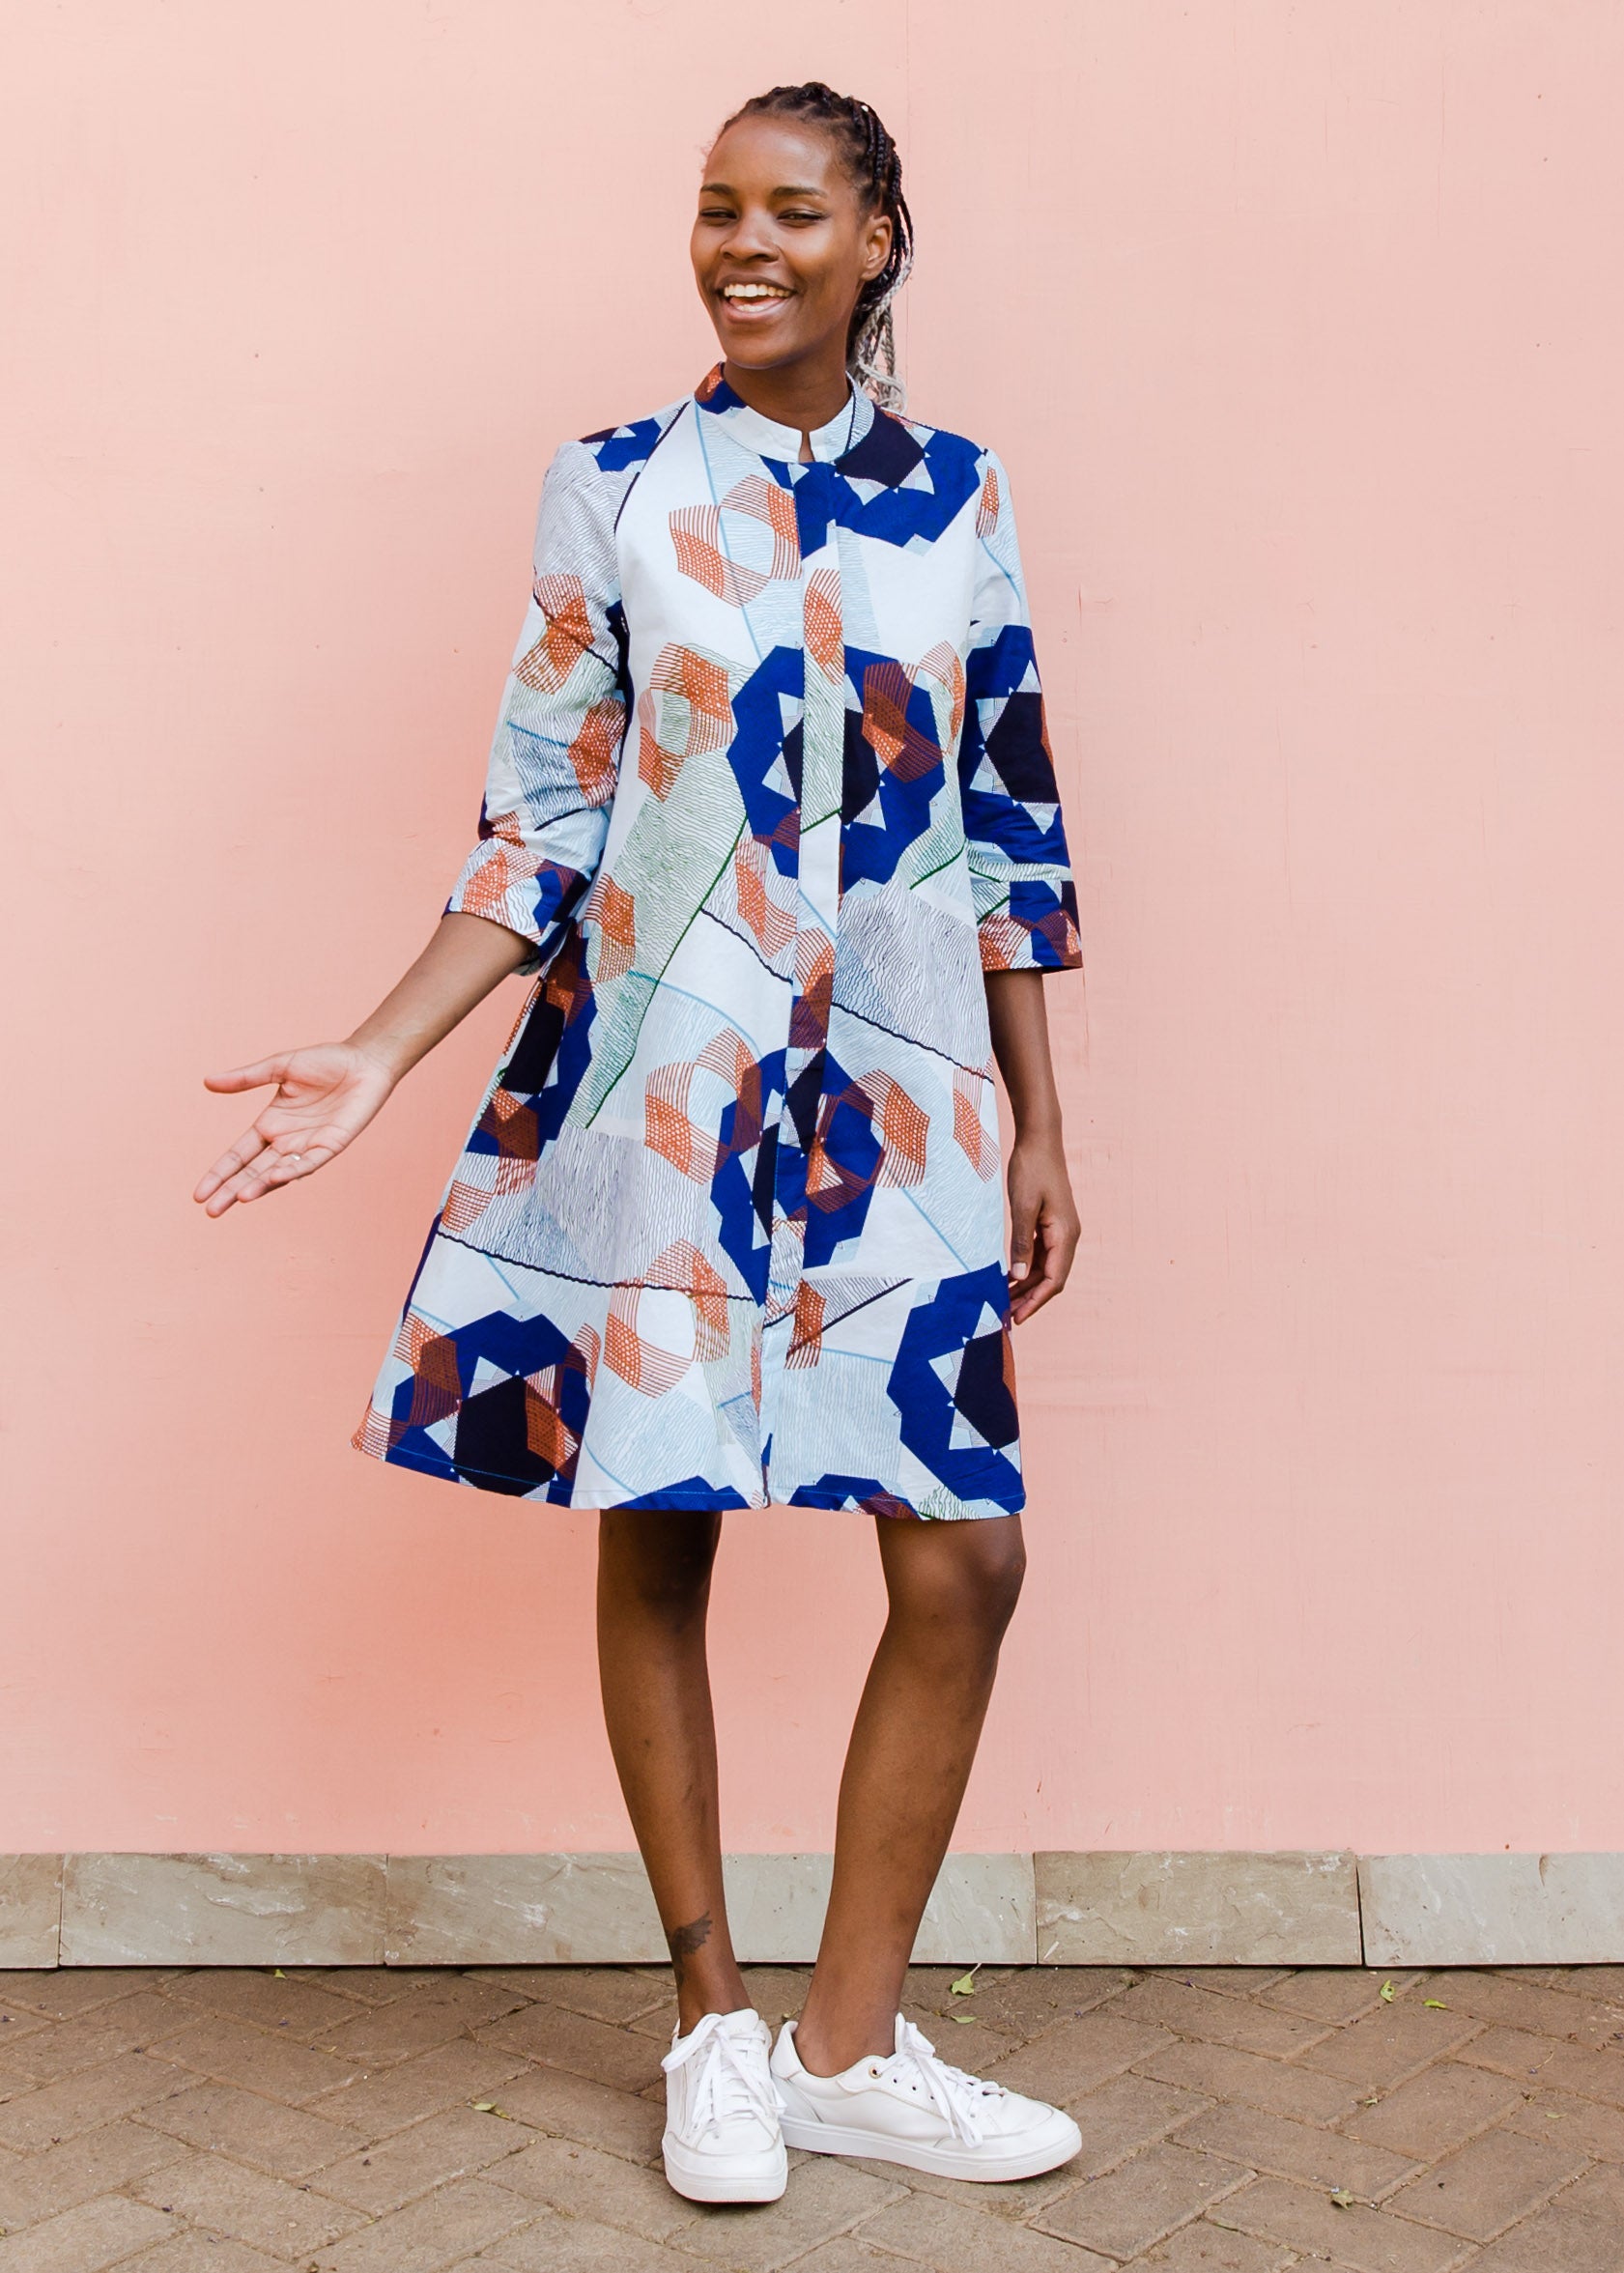 Model wearing dress with blue, green and orange abstract circular design pattern.